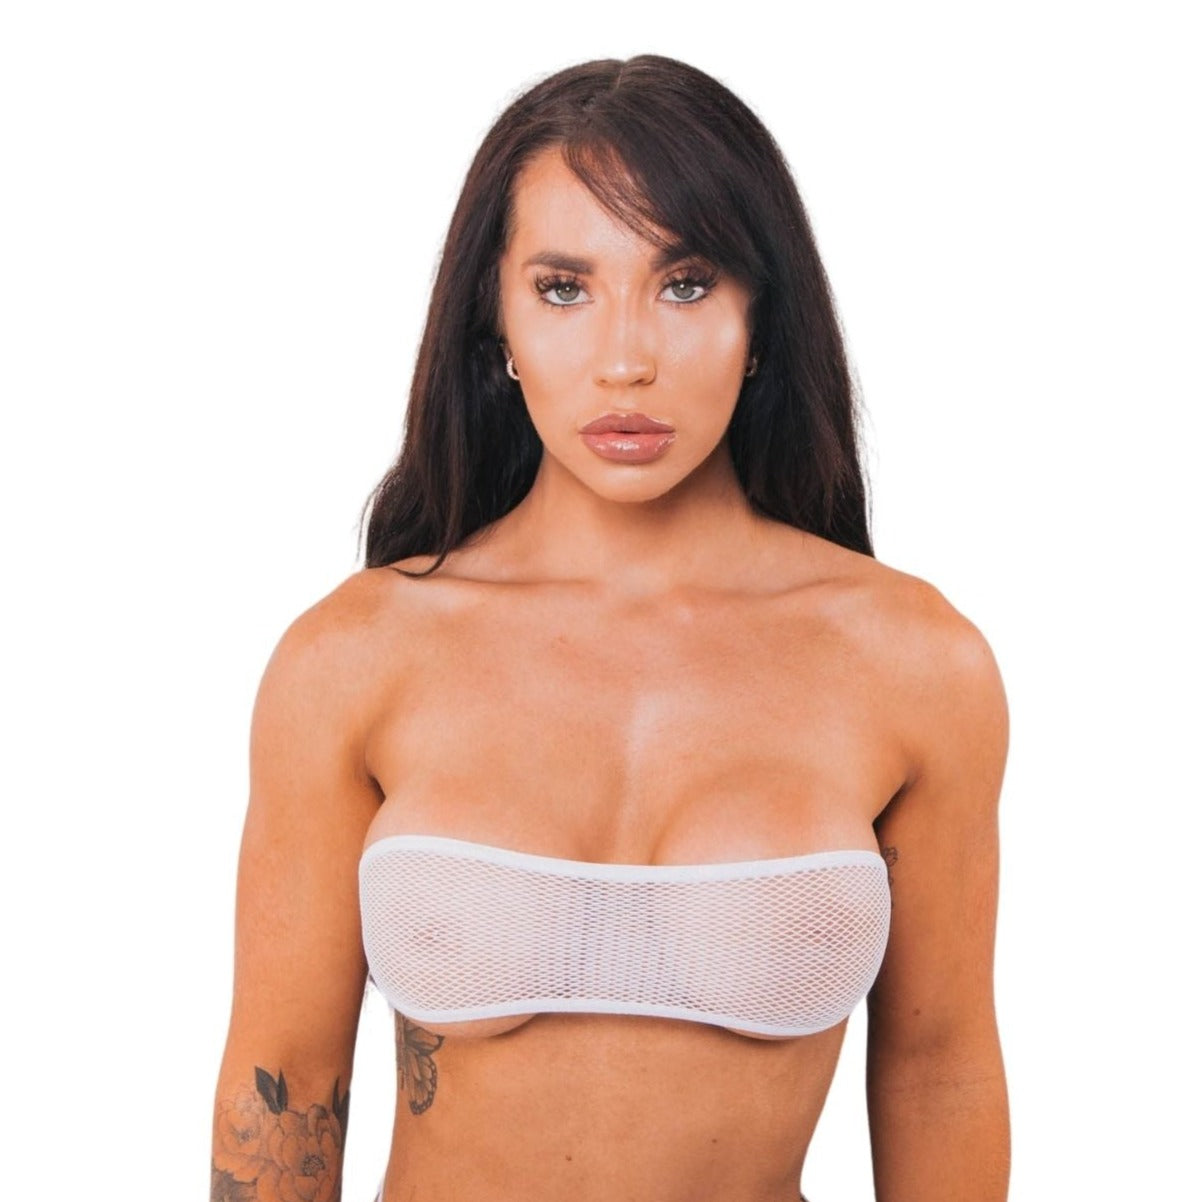 Bandeau Top Only - White Fishnet - White